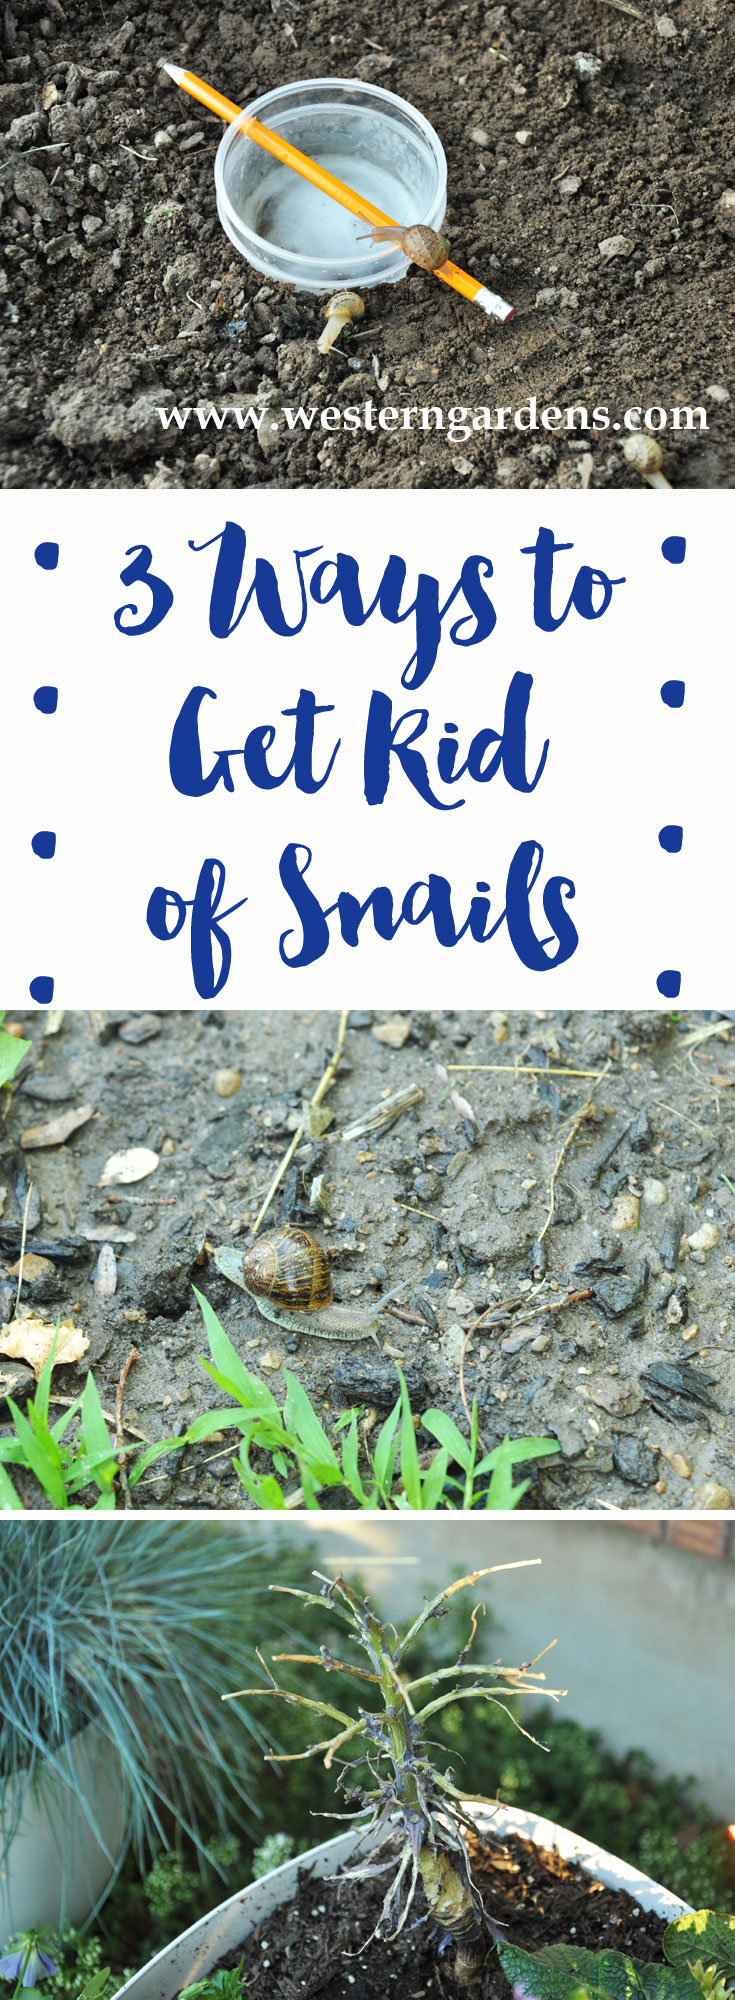 3 easy & cheap Ways to Get Rid of Snails, safe for pets and wildlife! www.westerngardens.com